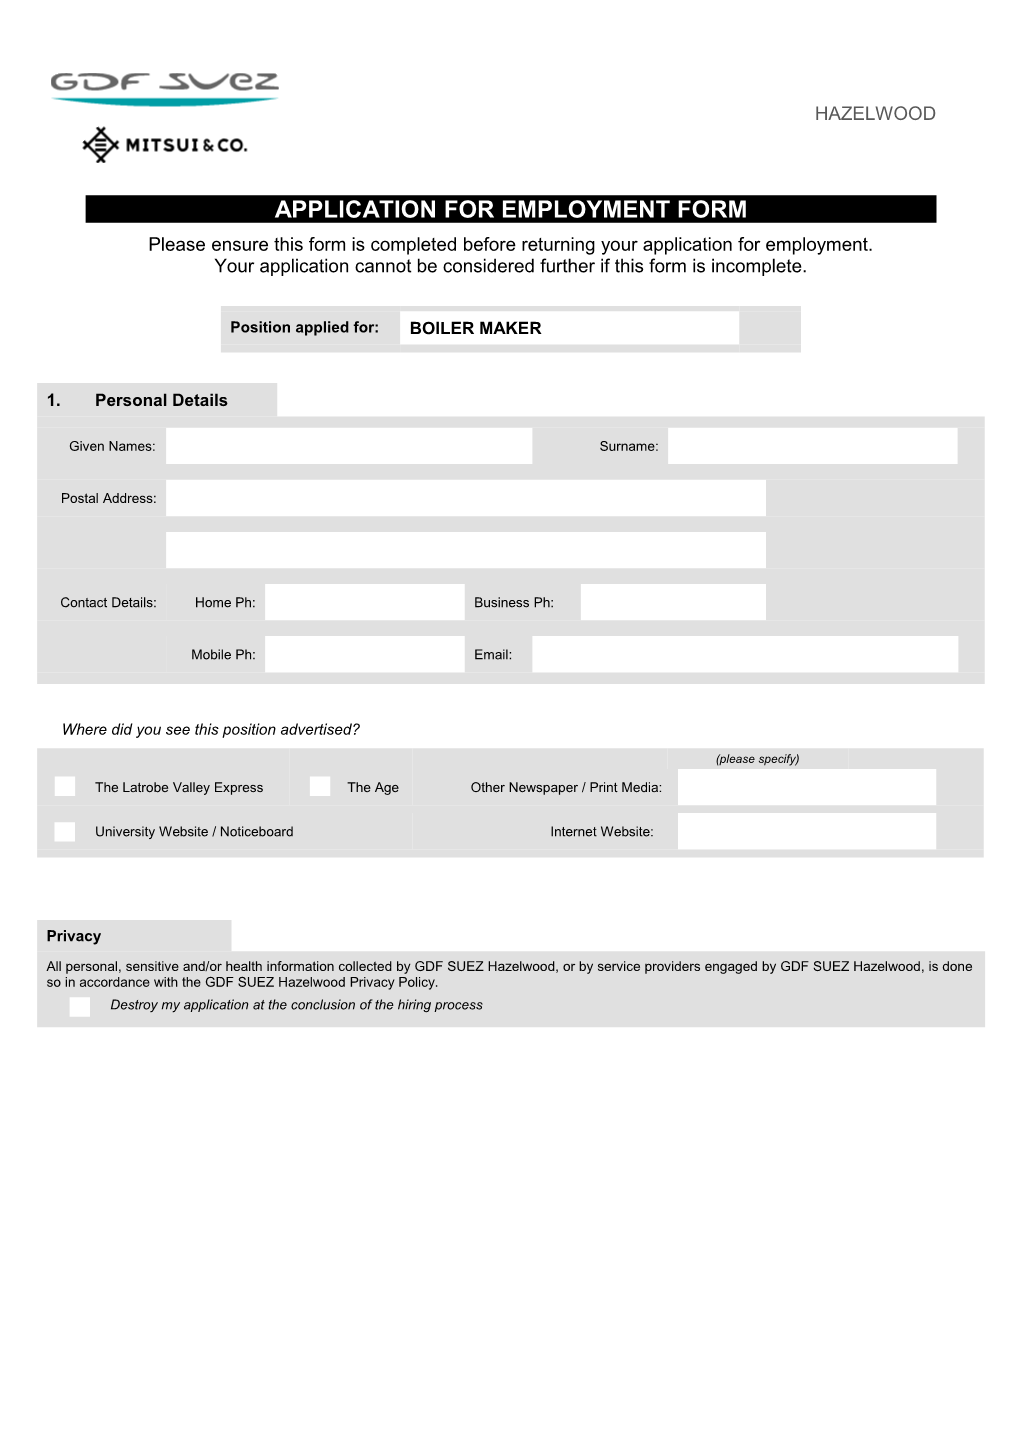 Please Ensure This Form Is Completed Before Returning Your Application for Employment